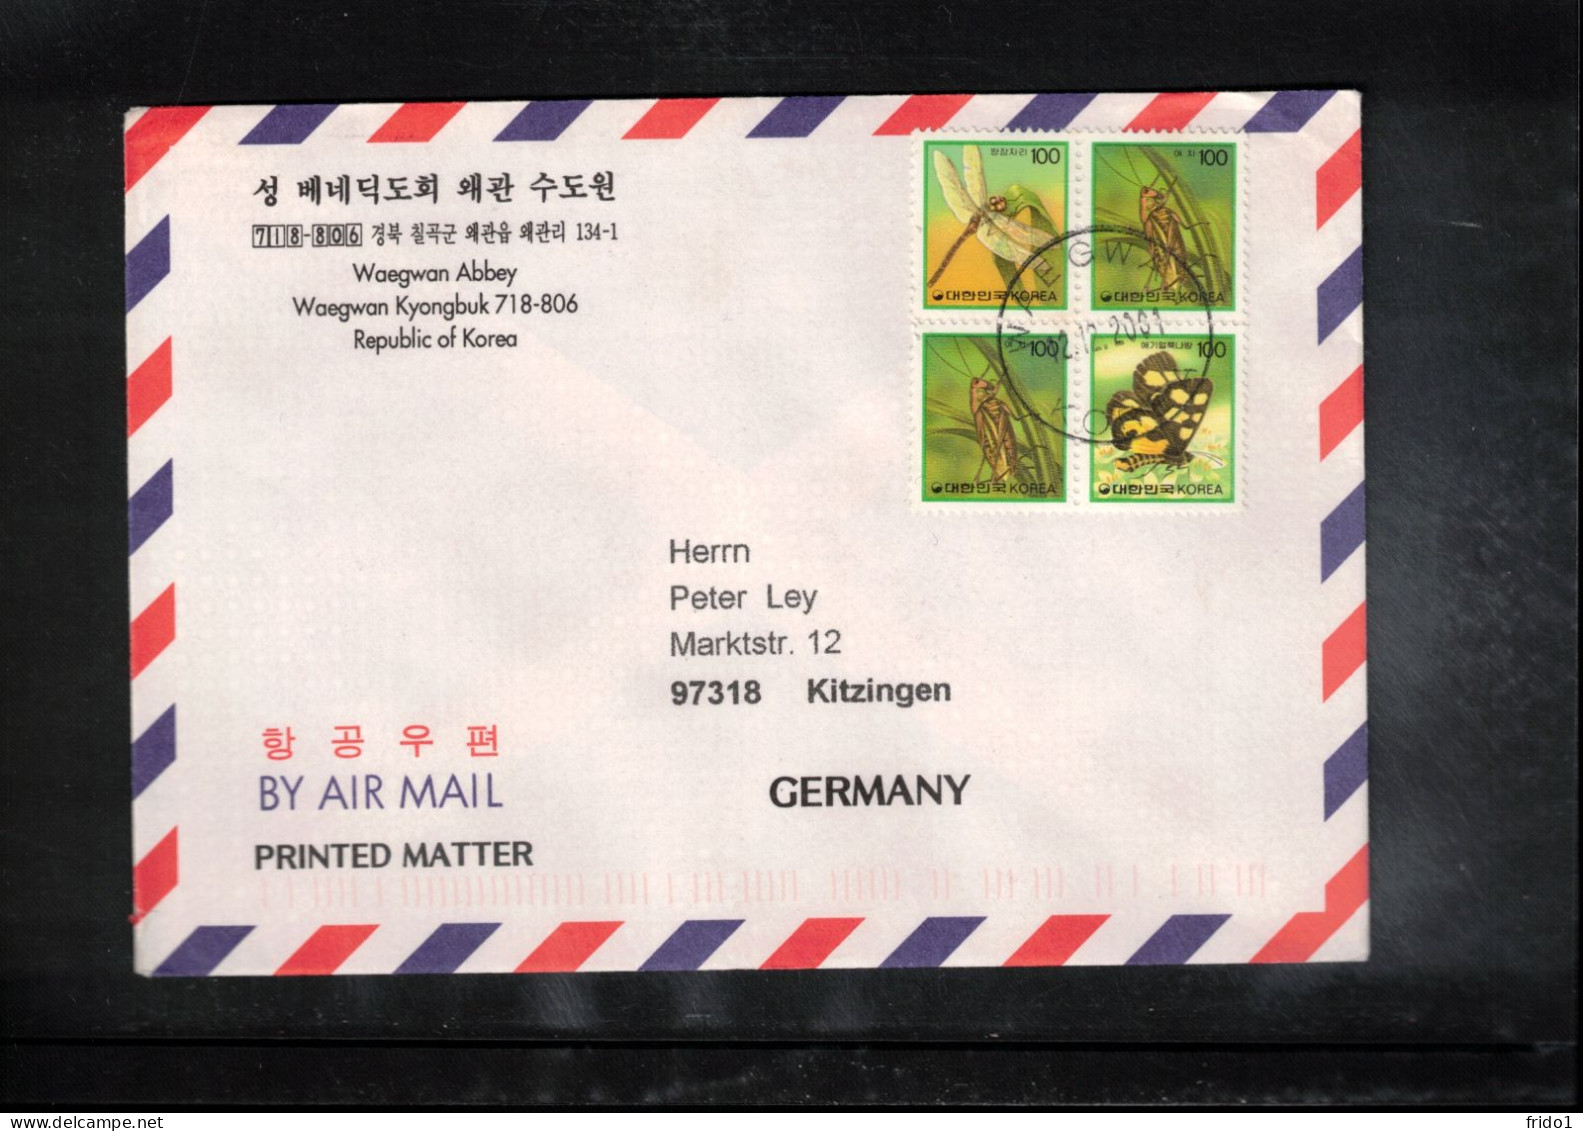 South Korea 2001 Insects Interesting Airmail Letter - Korea, South